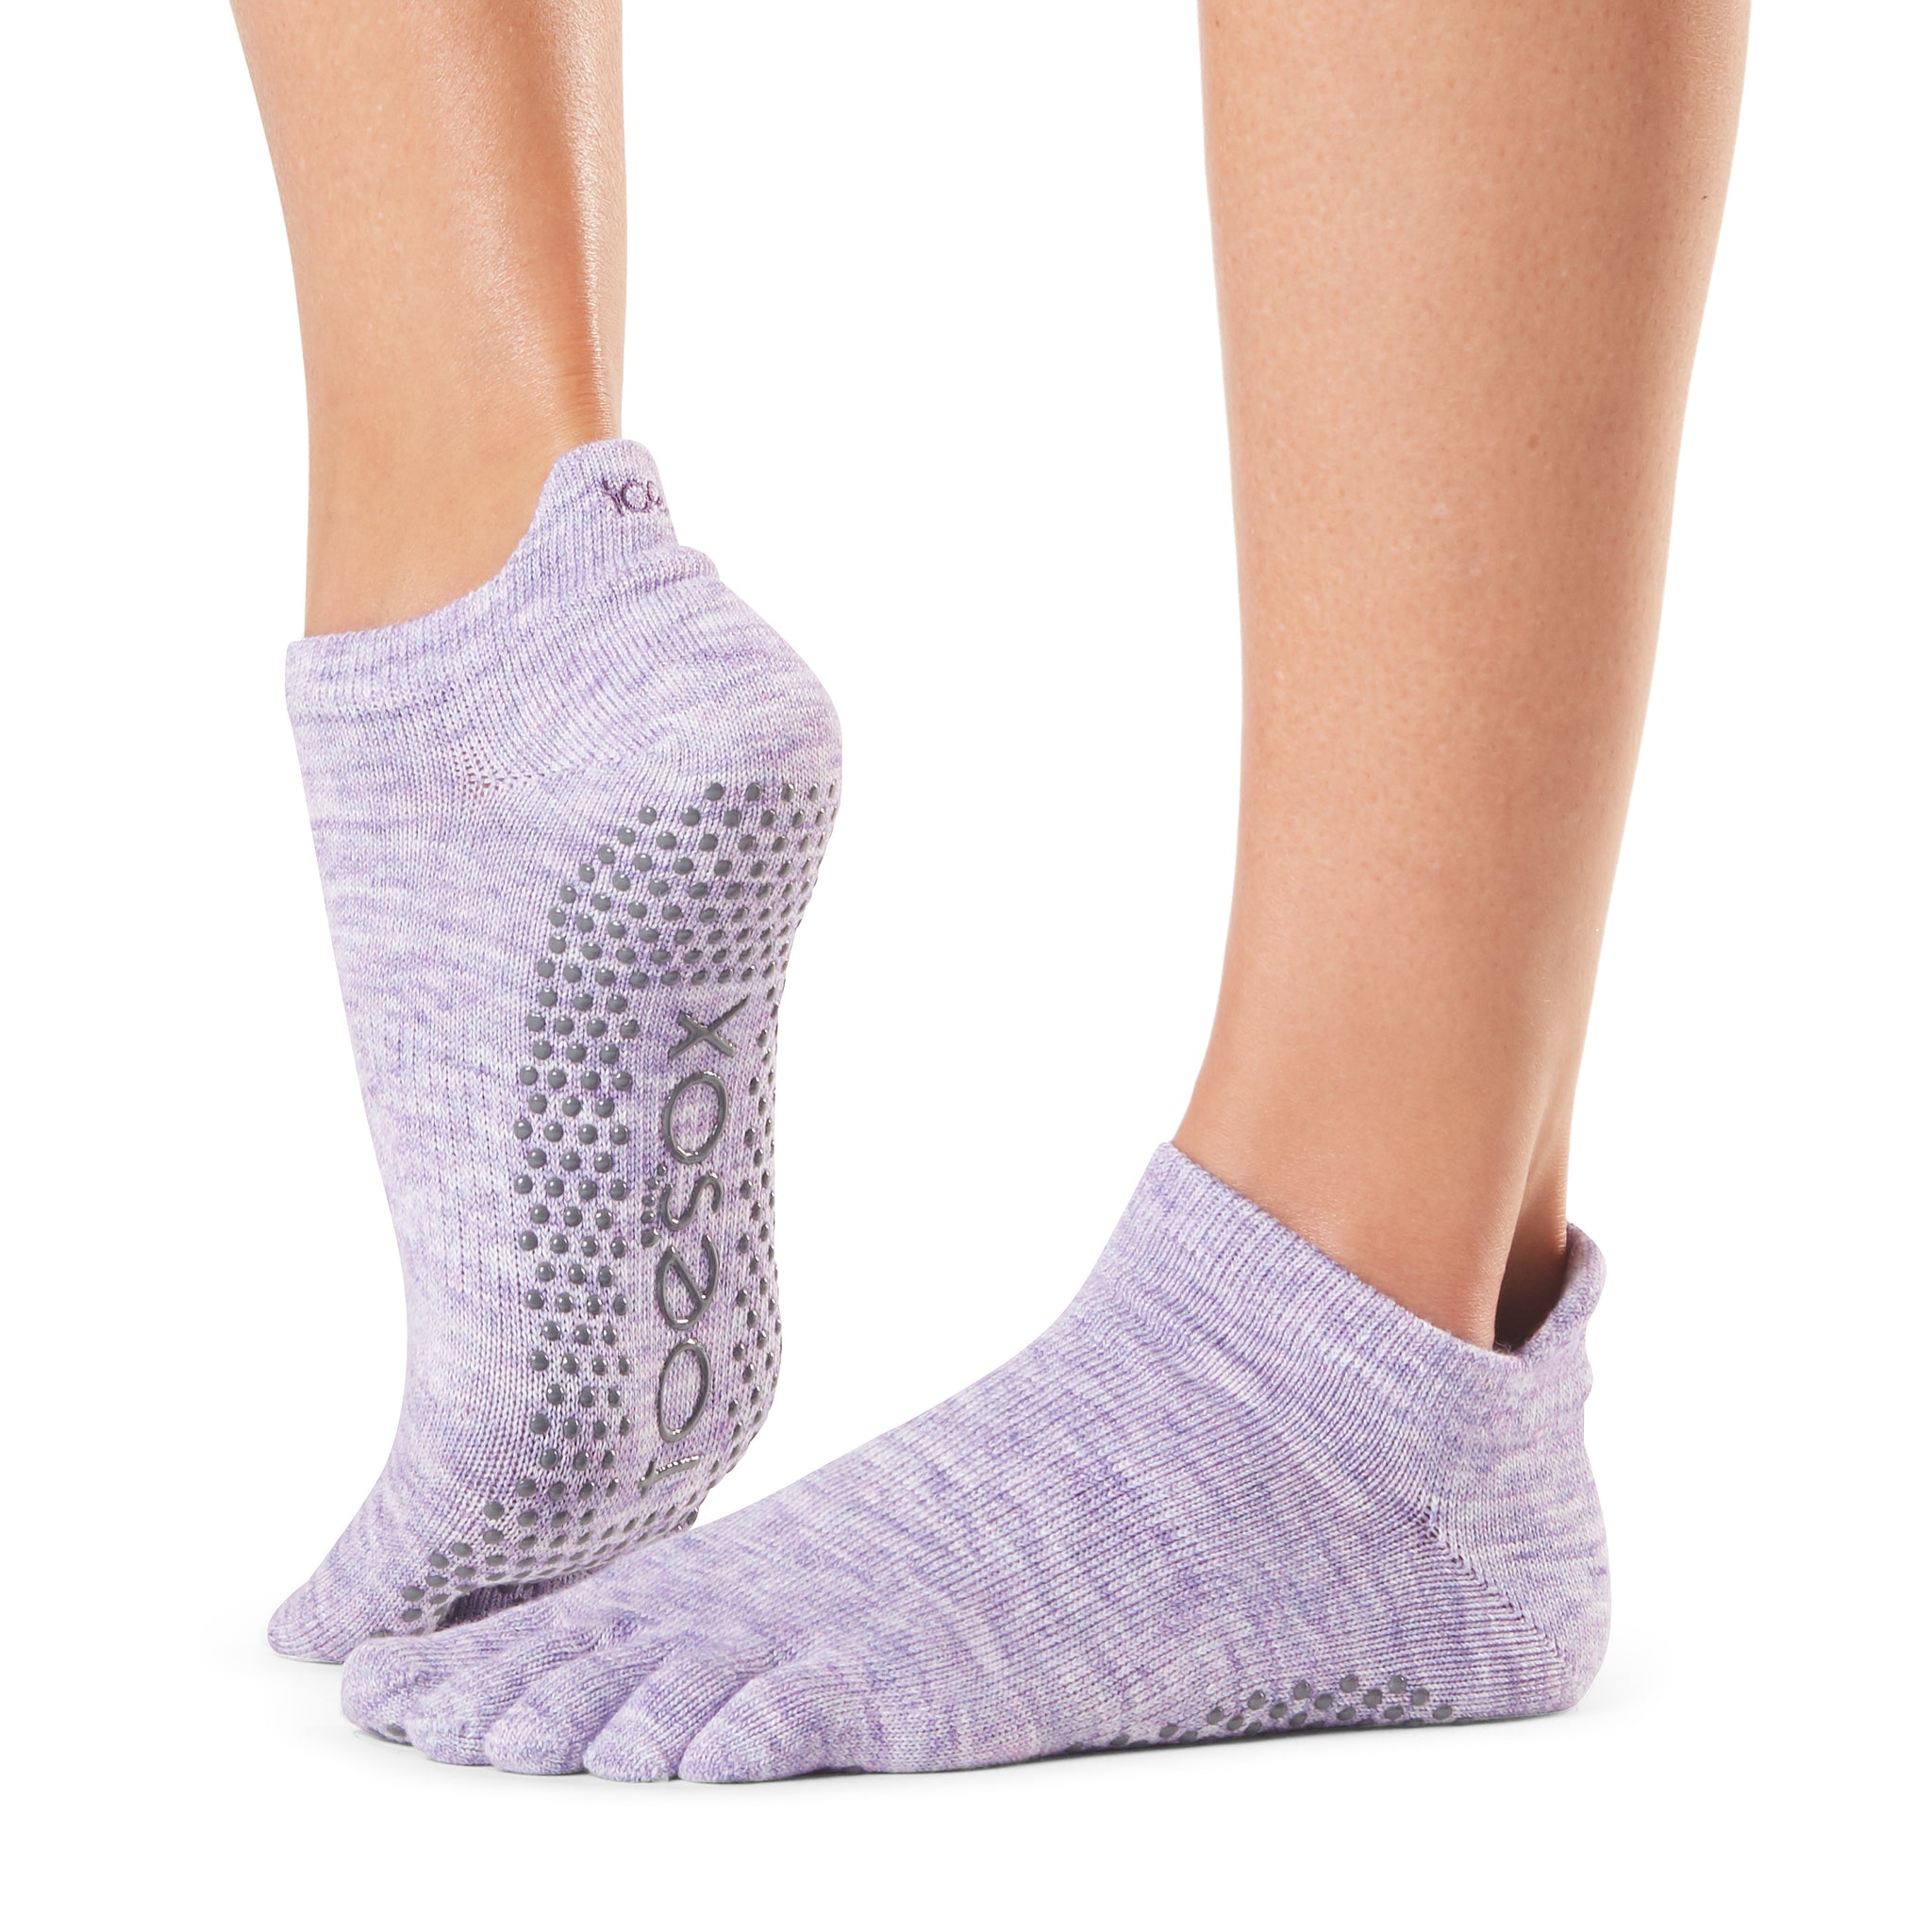 ToeSox - Low Rise Grip Socks - SPRING 2020 - T8 Fitness - Asia Yoga,  Pilates, Rehab, Fitness Products